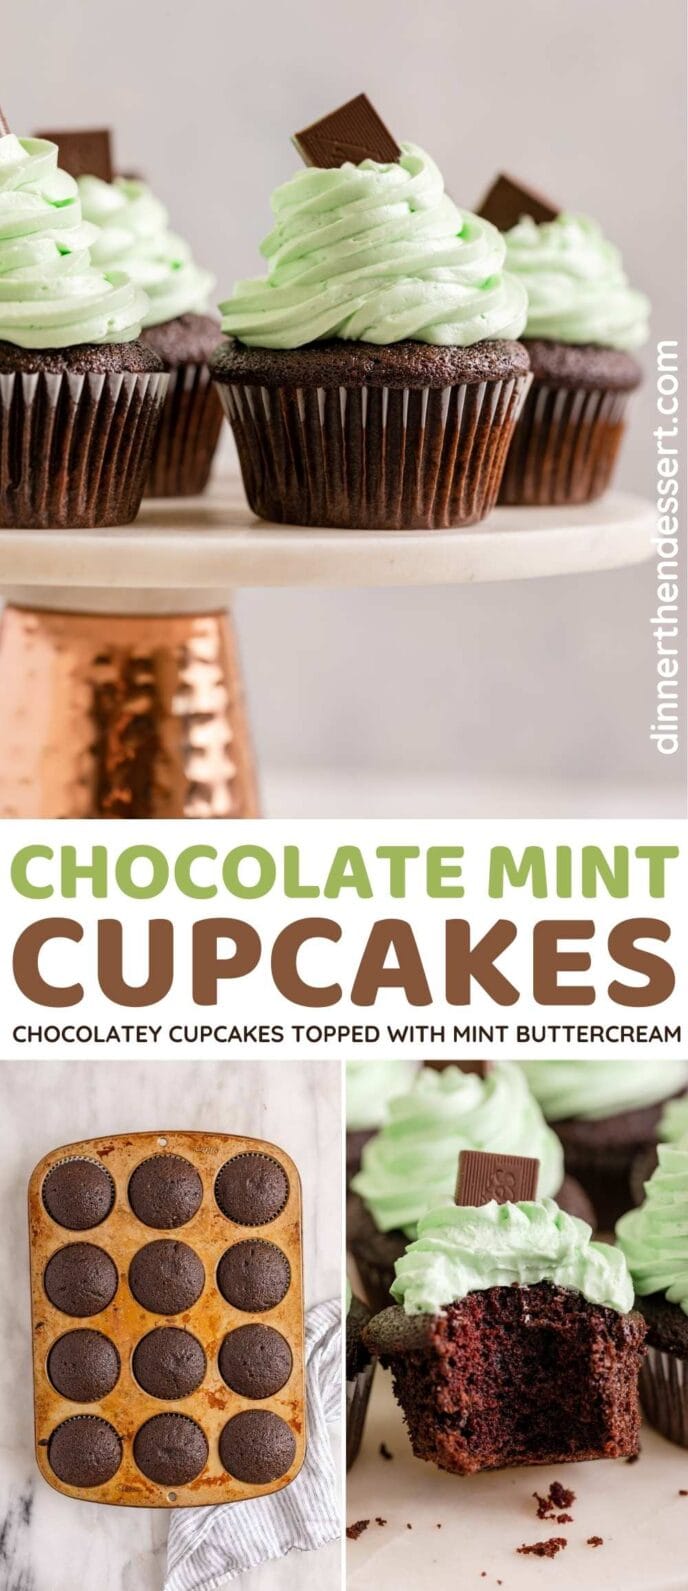 Chocolate Mint Cupcakes fcollage